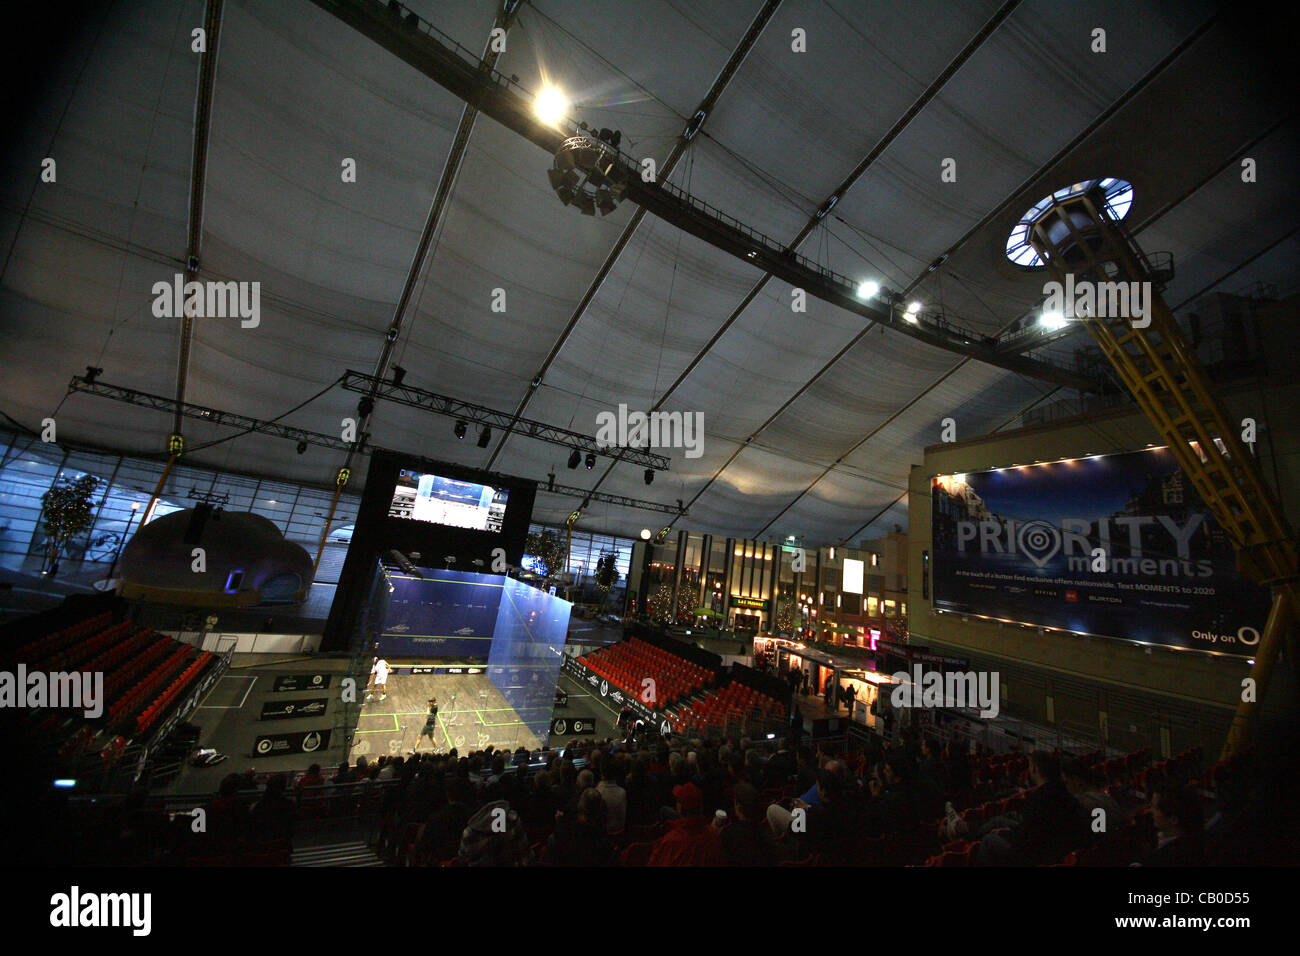 14.05.2012 The O2, London, England. A general view of the court inside the O2 arena. Stock Photo